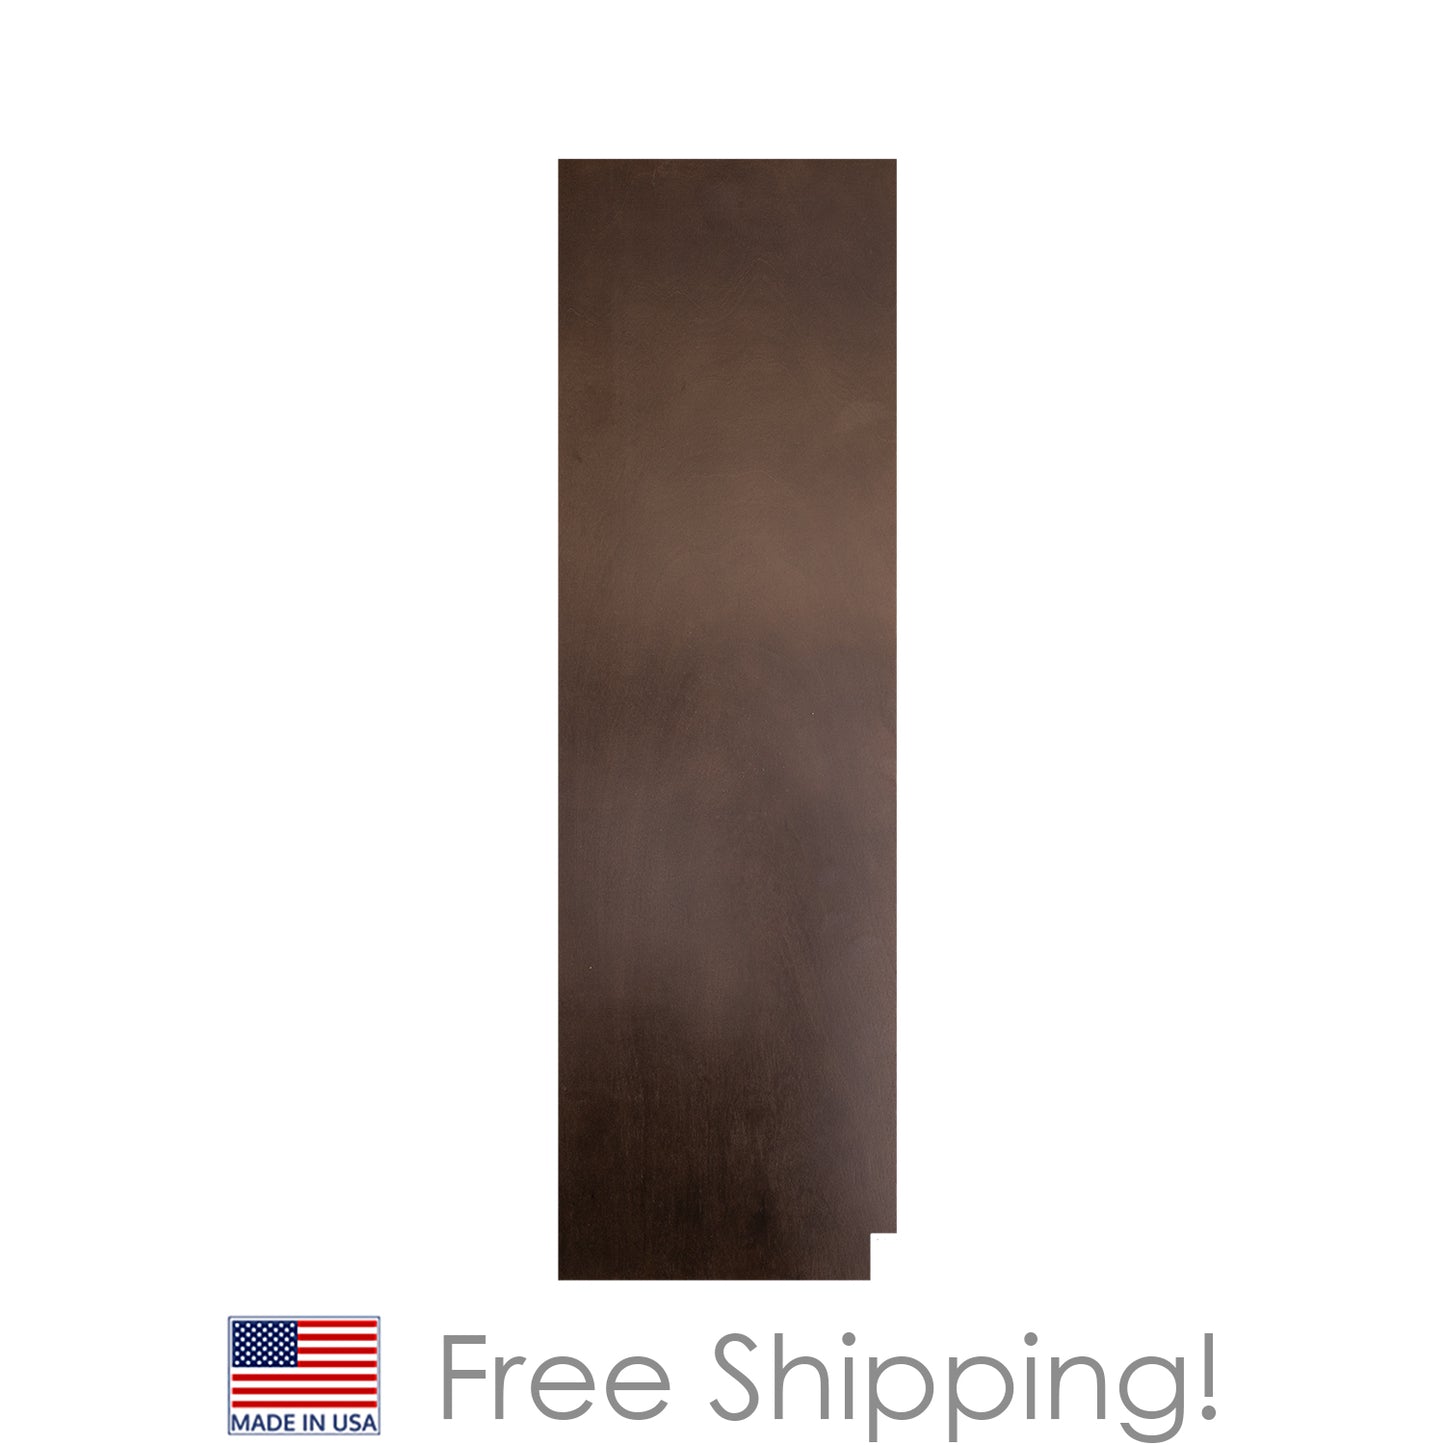 Quicklock RTA (Ready-to-Assemble) Espresso Stain .25"X23.25"X84" Pantry End Panel - Right side